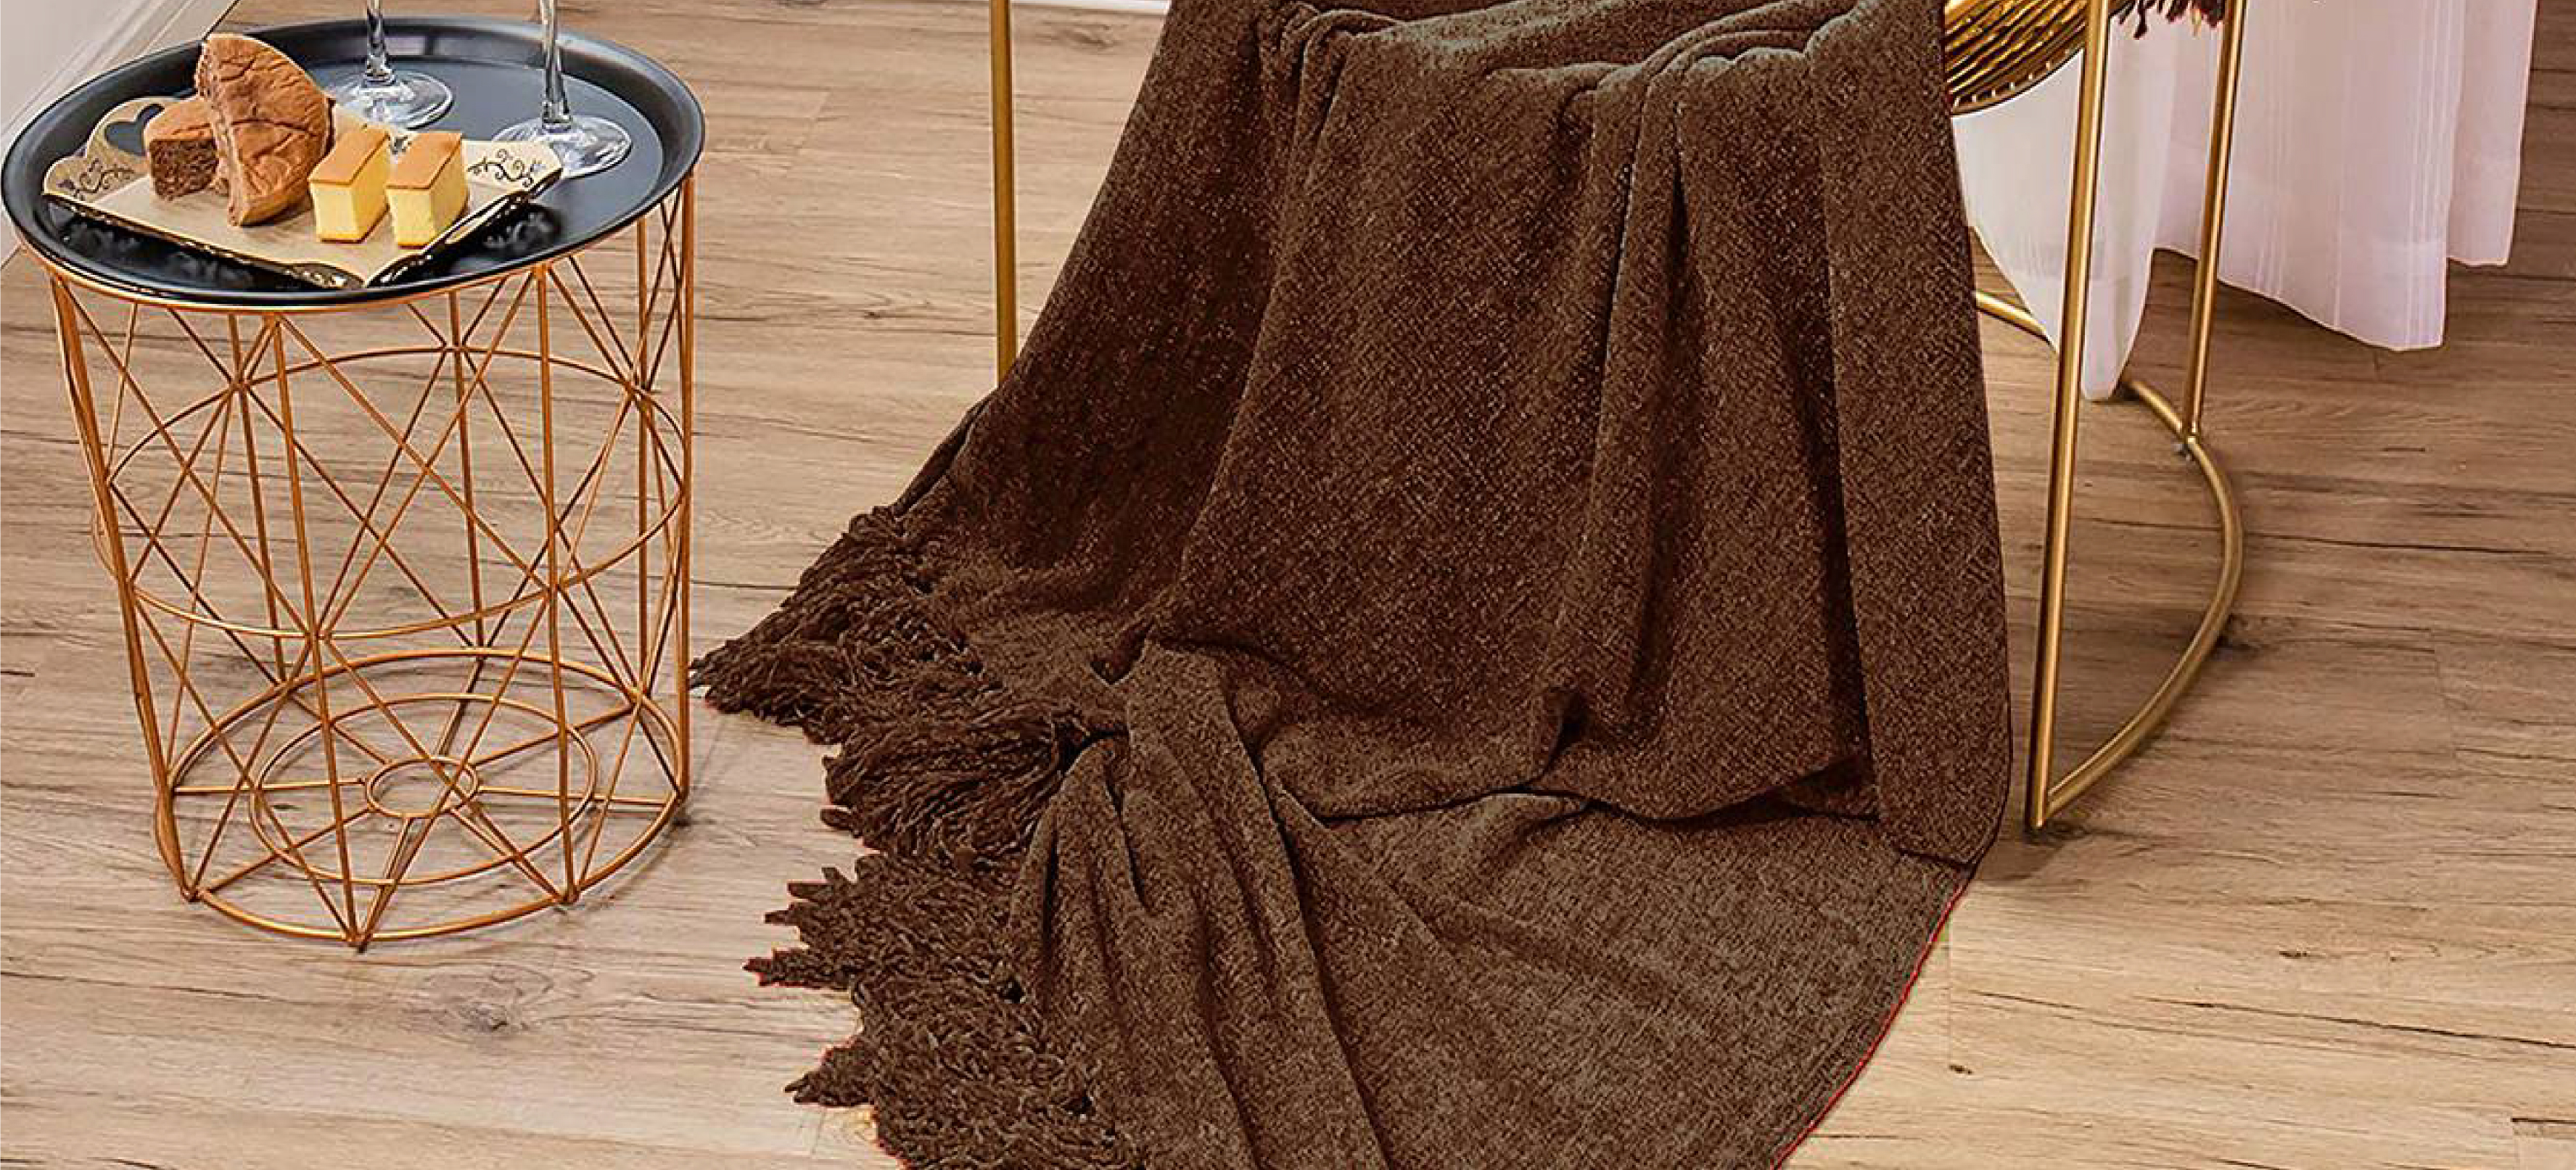 Create a cozy environment for your home with the help of throws